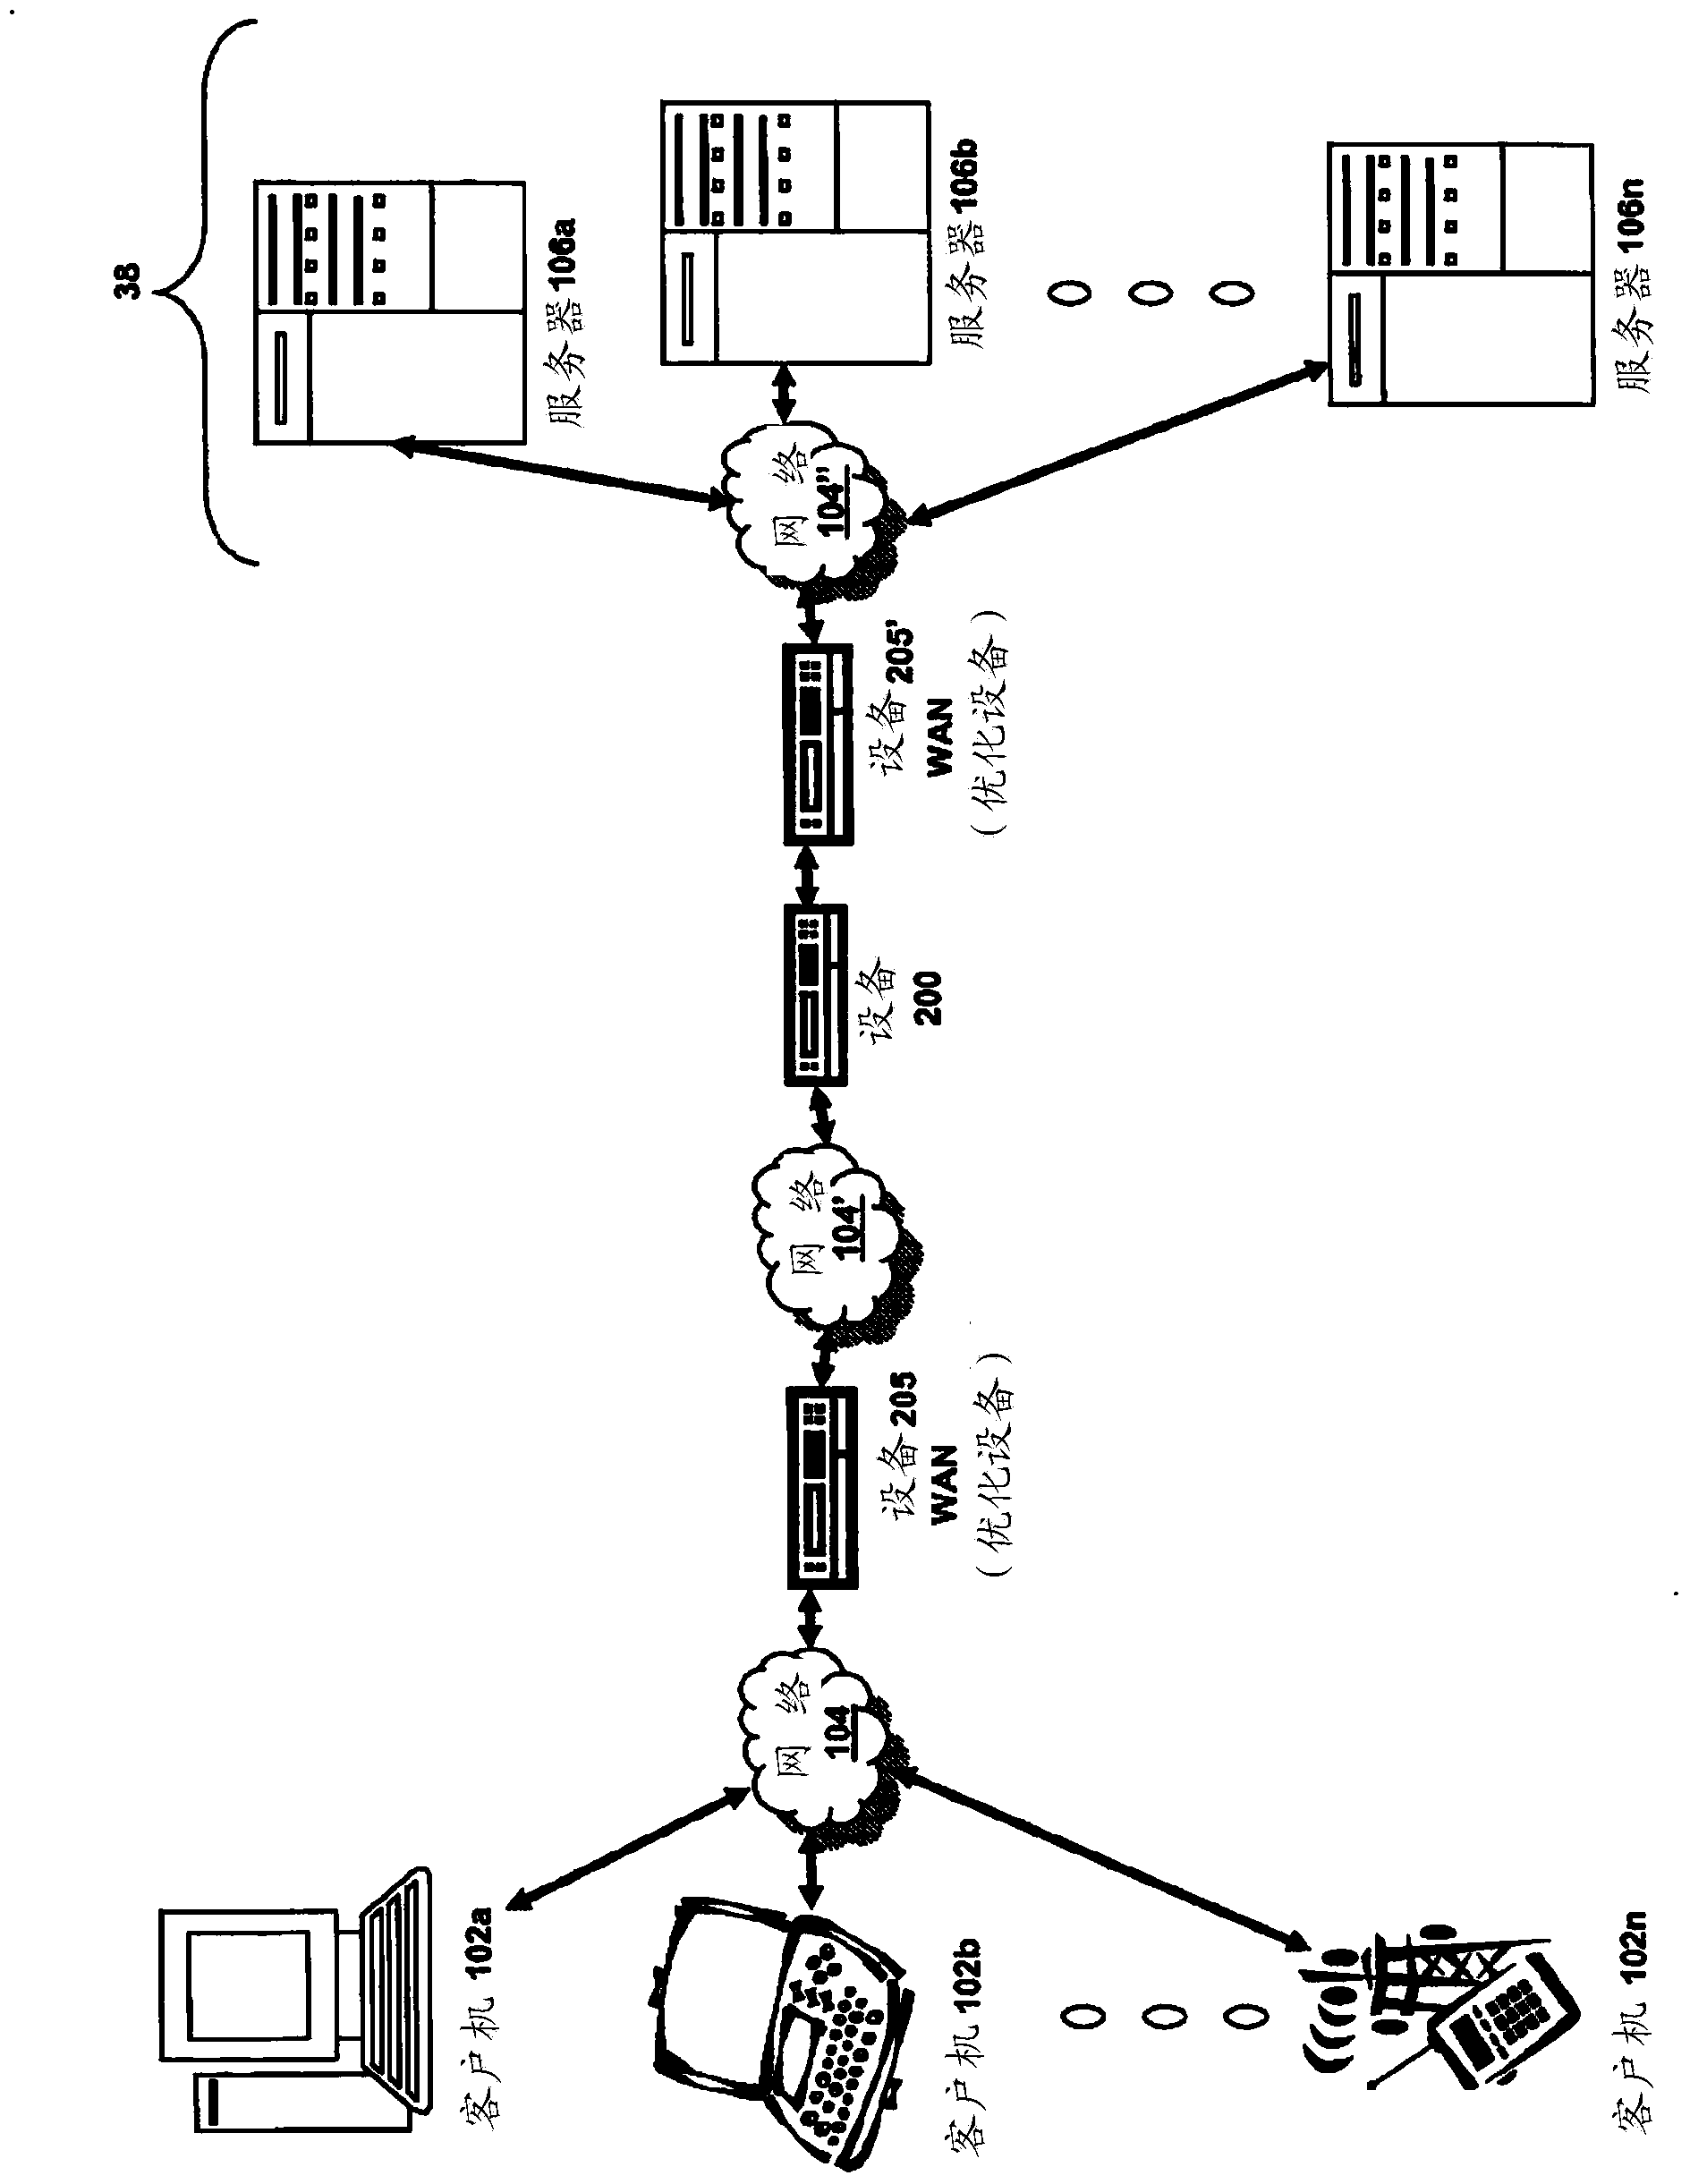 Systems and methods for policy based routing for multiple next hops